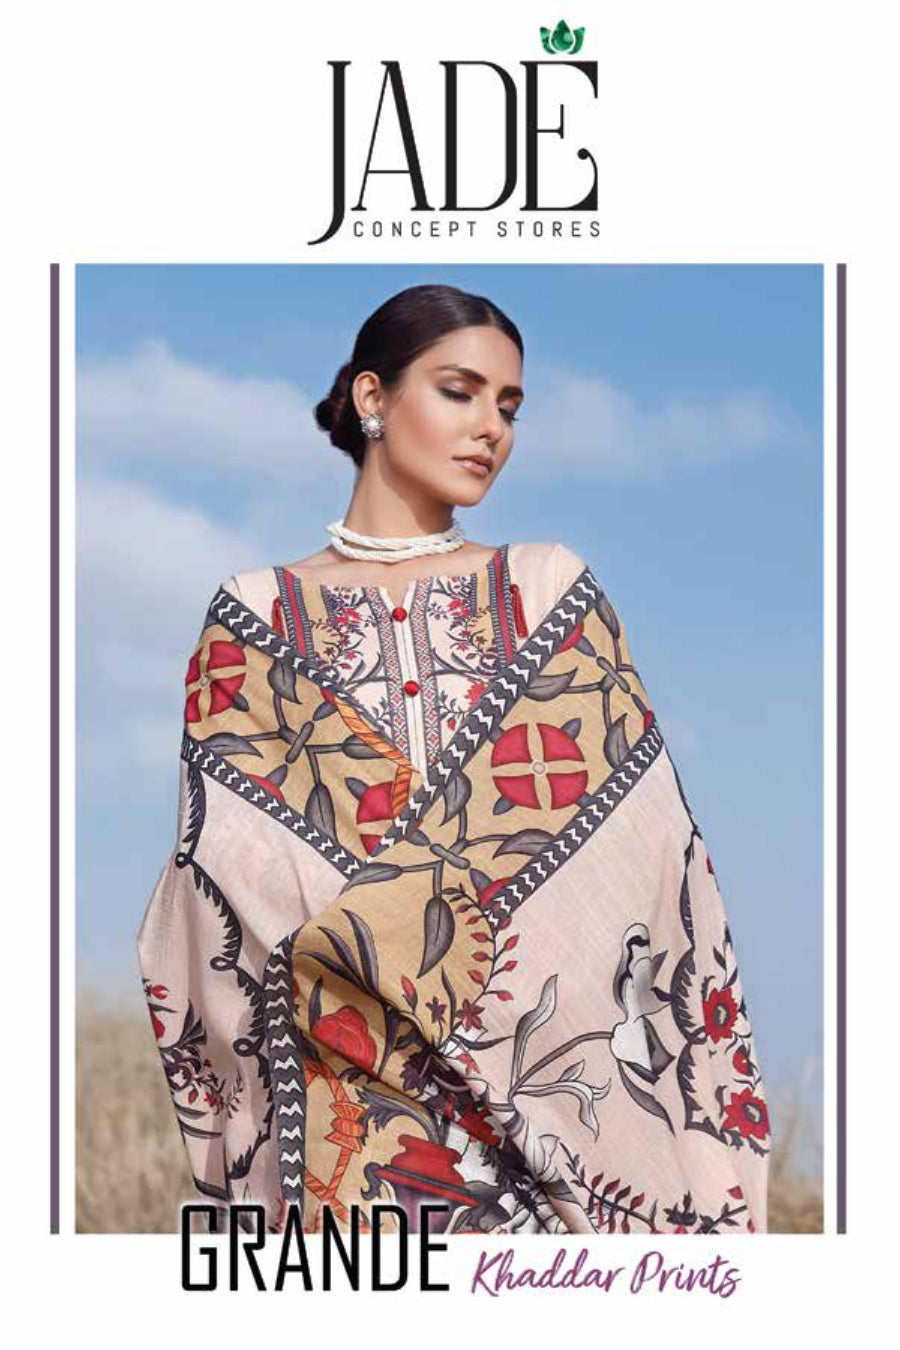 Jade Classic Revitalized by Firdous Lawn Grane Khaddar Prints Collection 2021